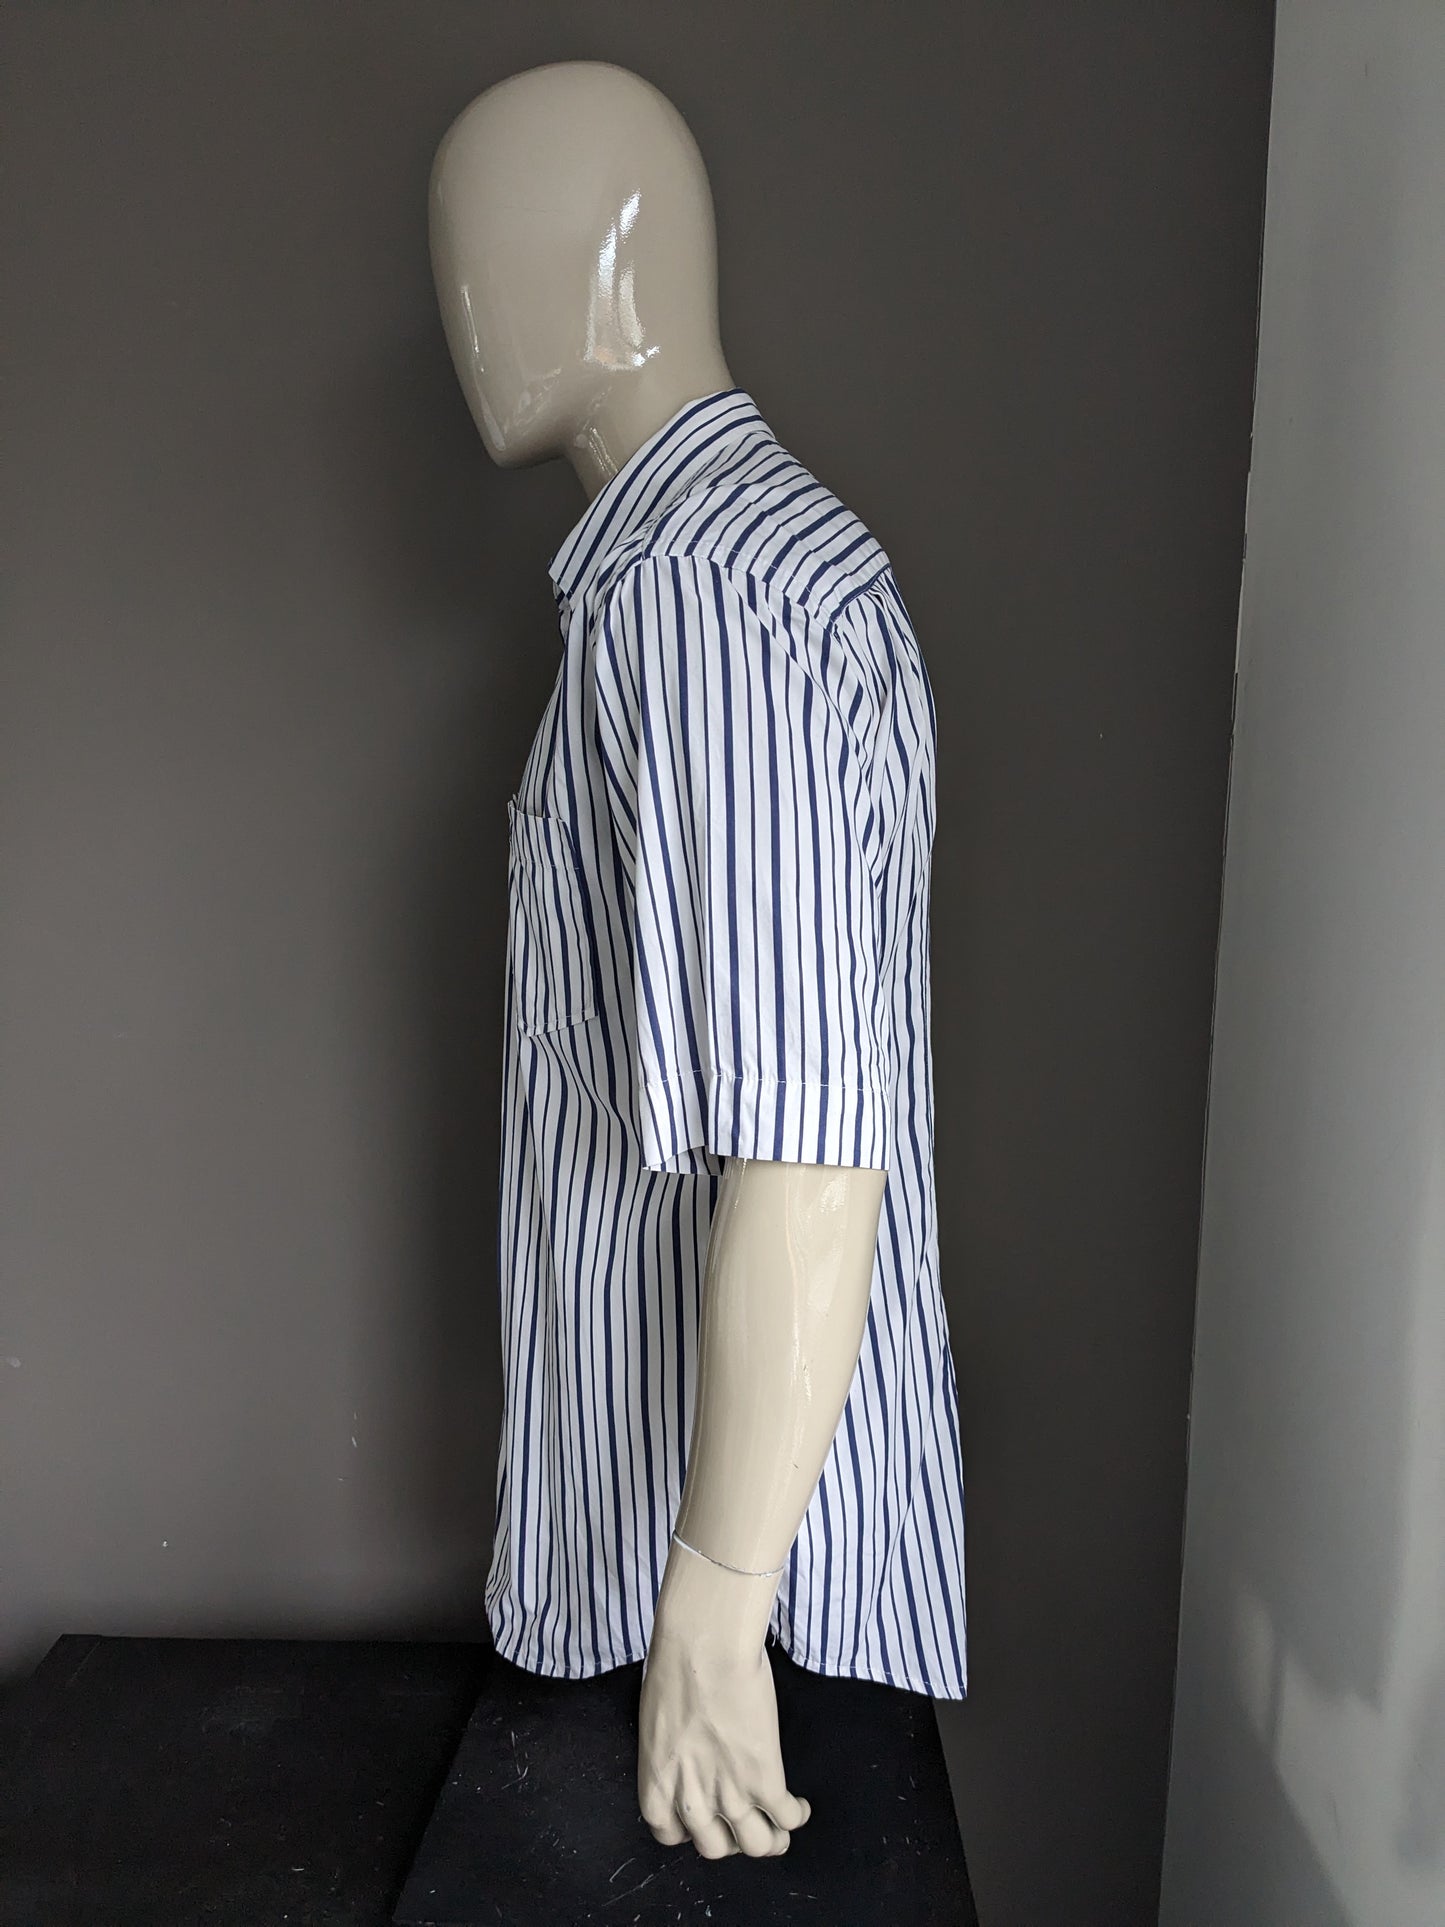 Vintage culture muscle shirt short sleeve. Blue white striped. Size XL.